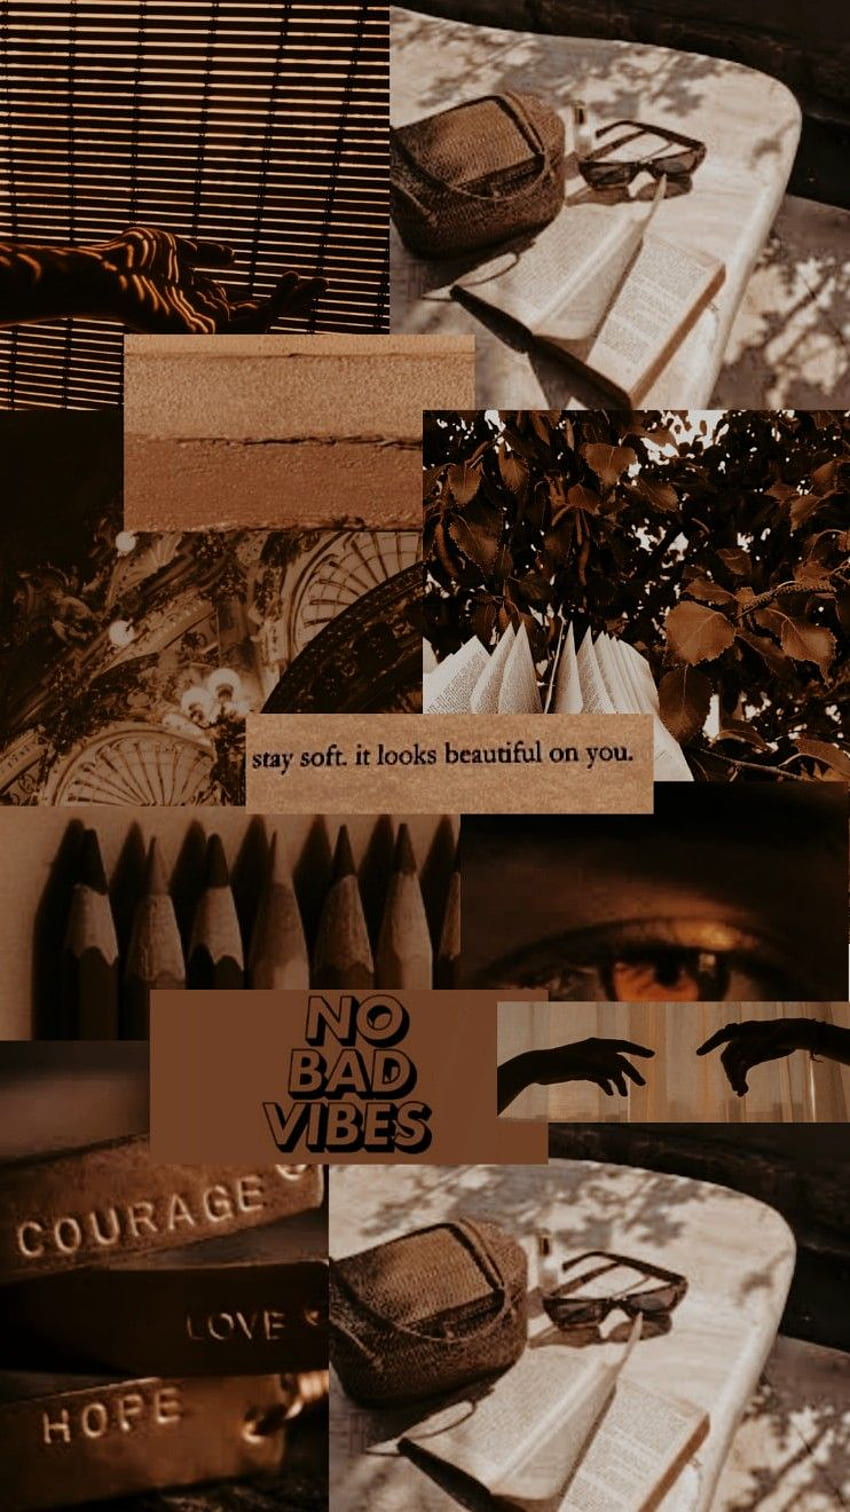 Aesthetic collage of sepia photos with a book, flowers, and a quote. - Light brown, brown